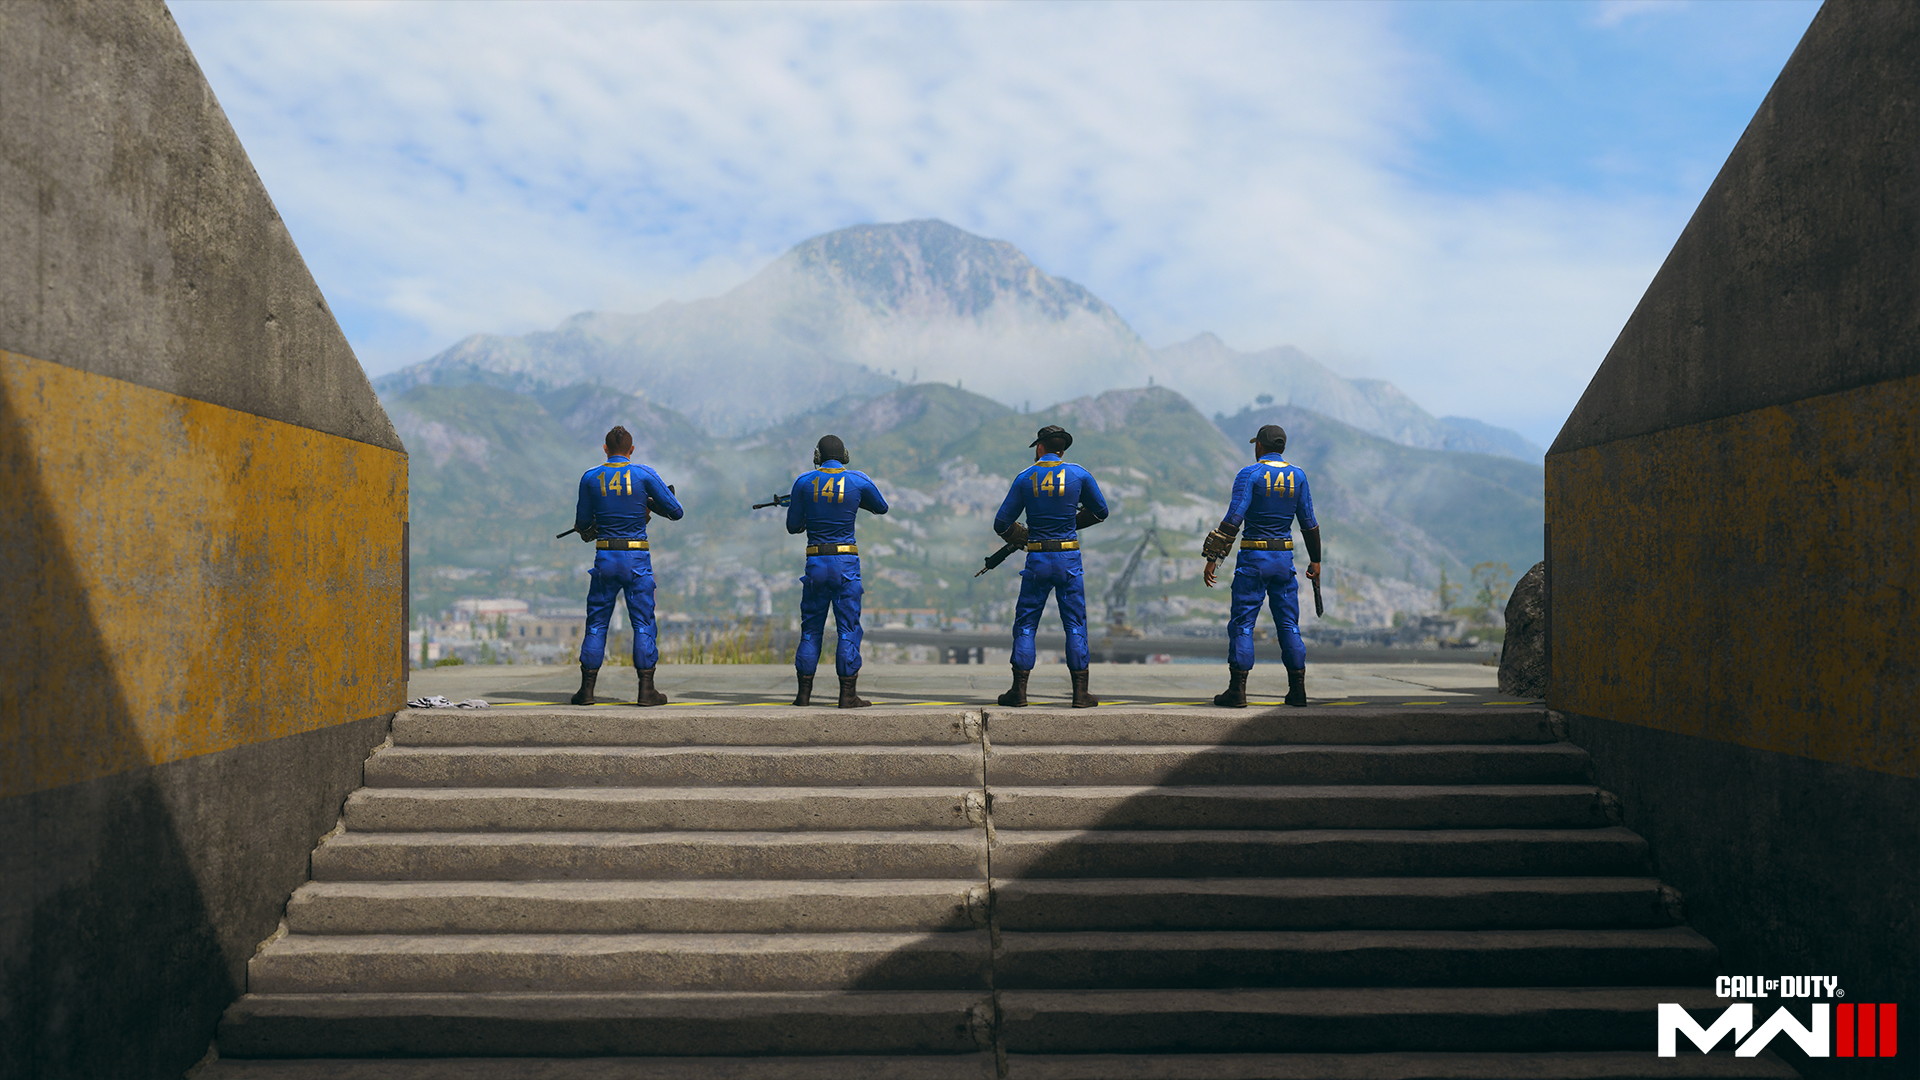 Call of Duty operators dressed in Fallout Vault Suits appear to emerge from an underground bunker to blue skies 